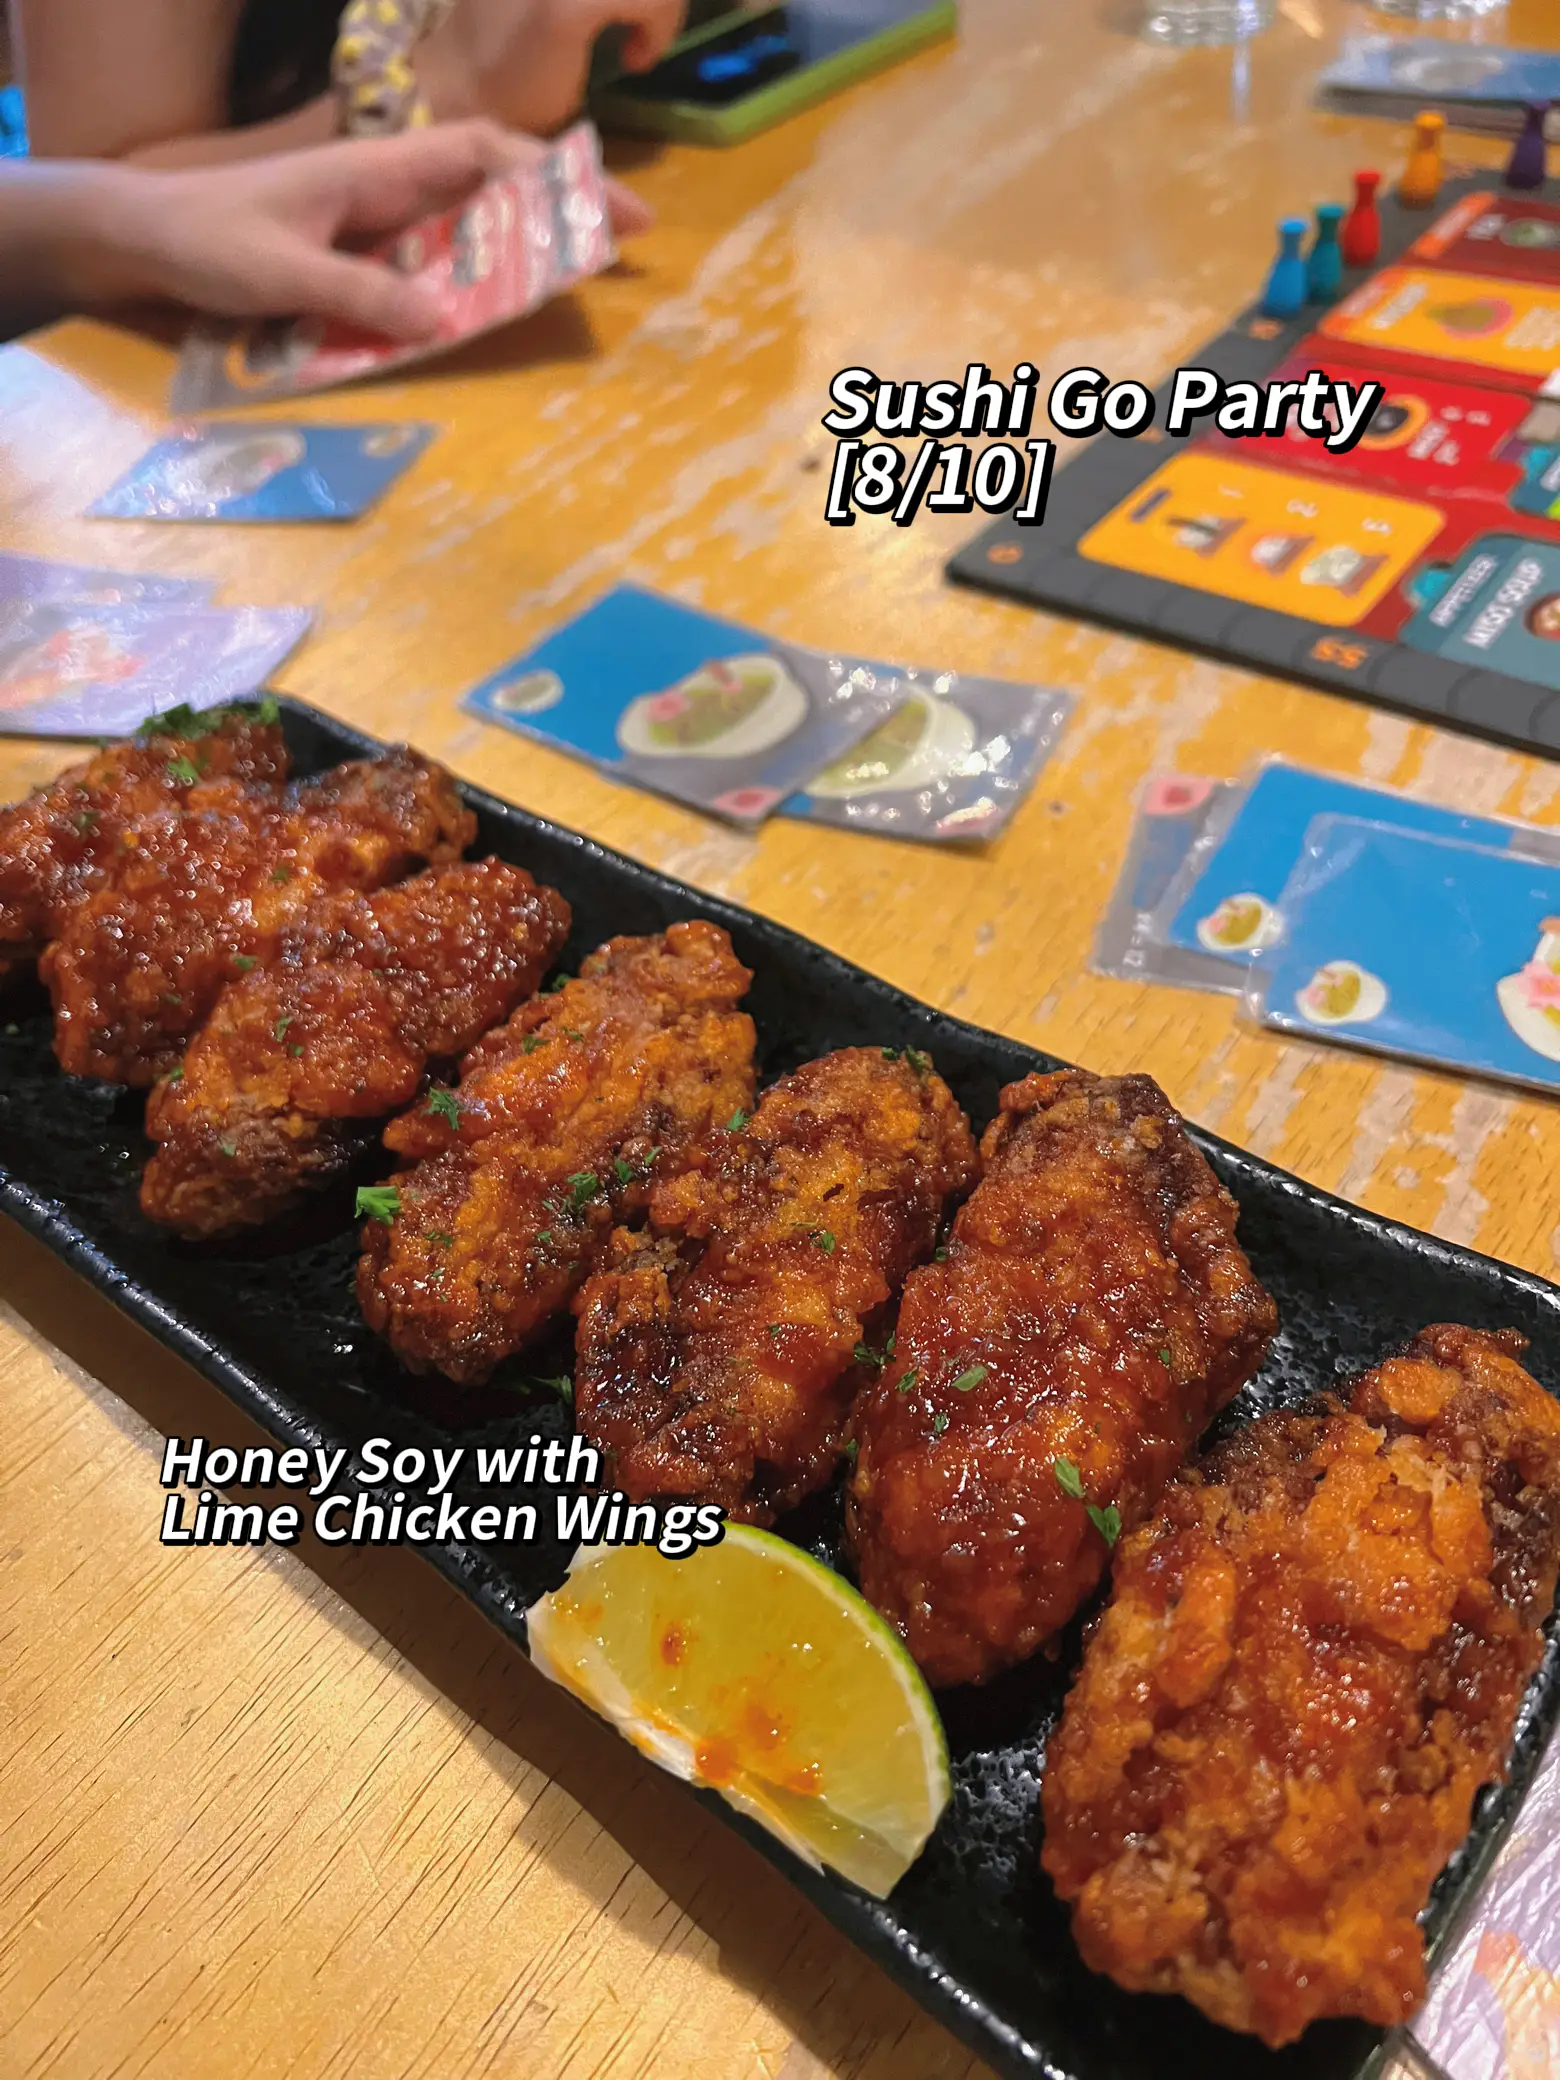 Board games cafe — endless fun + good food 🥰's images(3)